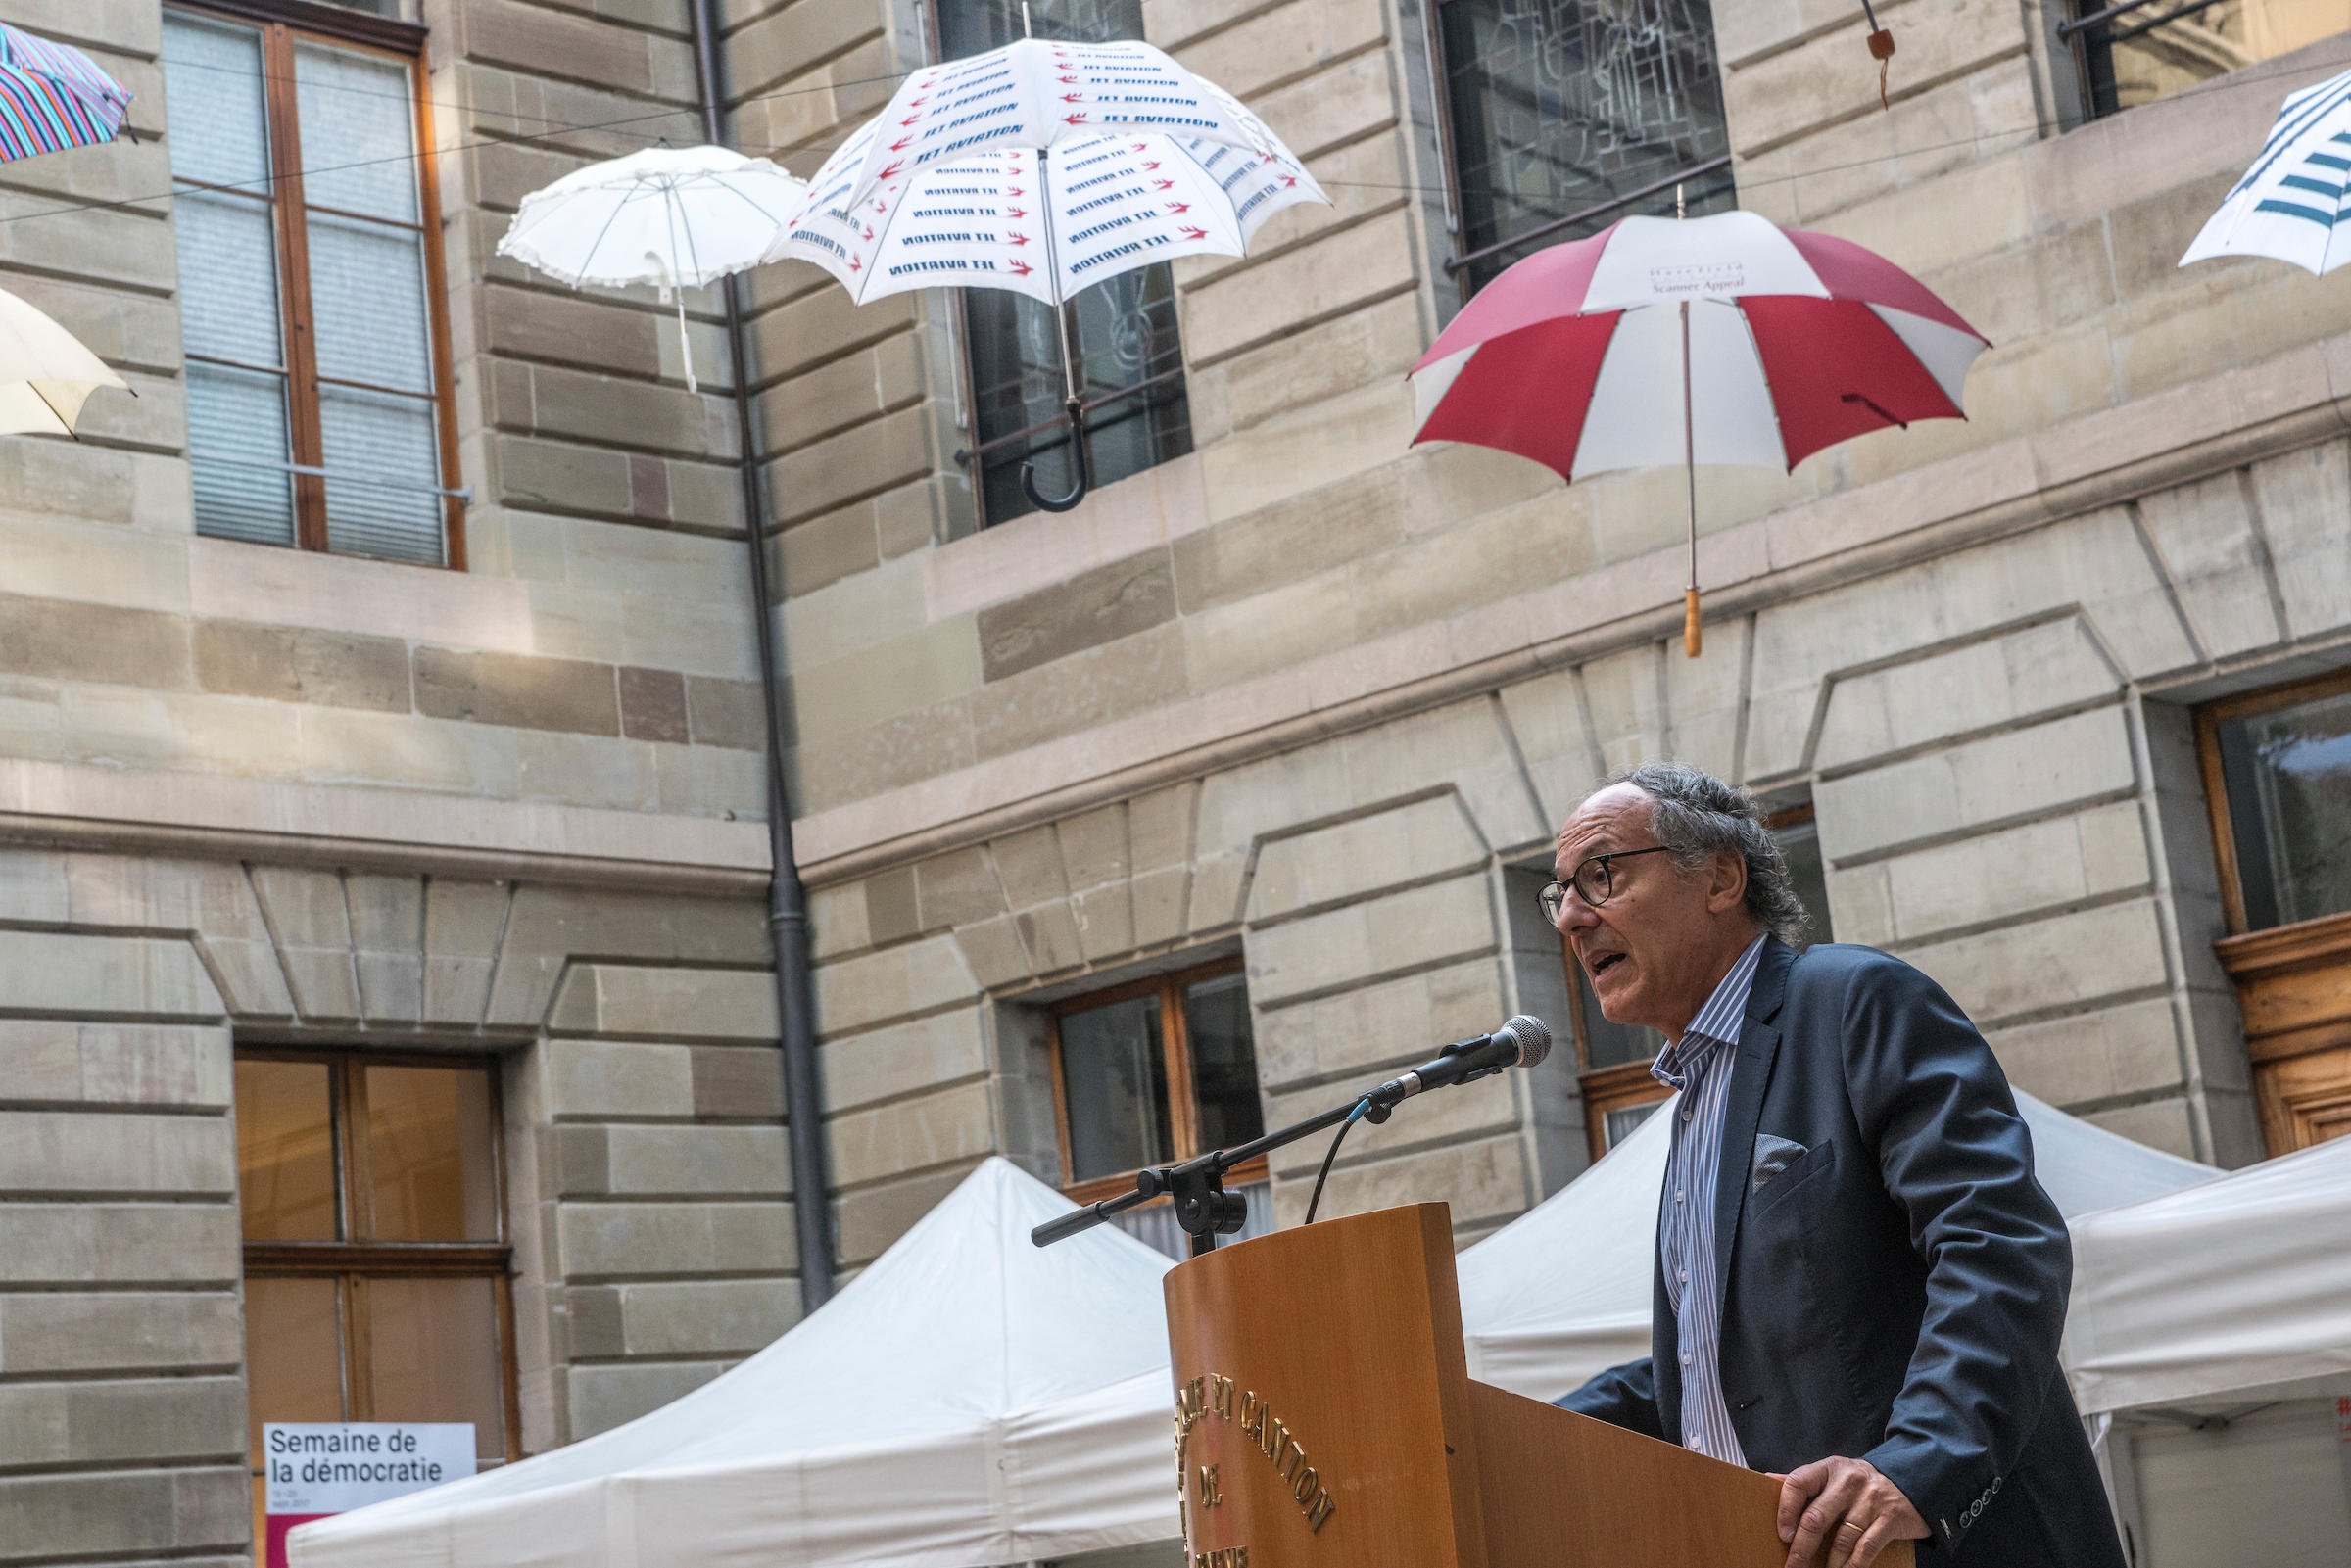 Yves Flückiger, vice-chancellor of Geneva University addressing an open-air audience